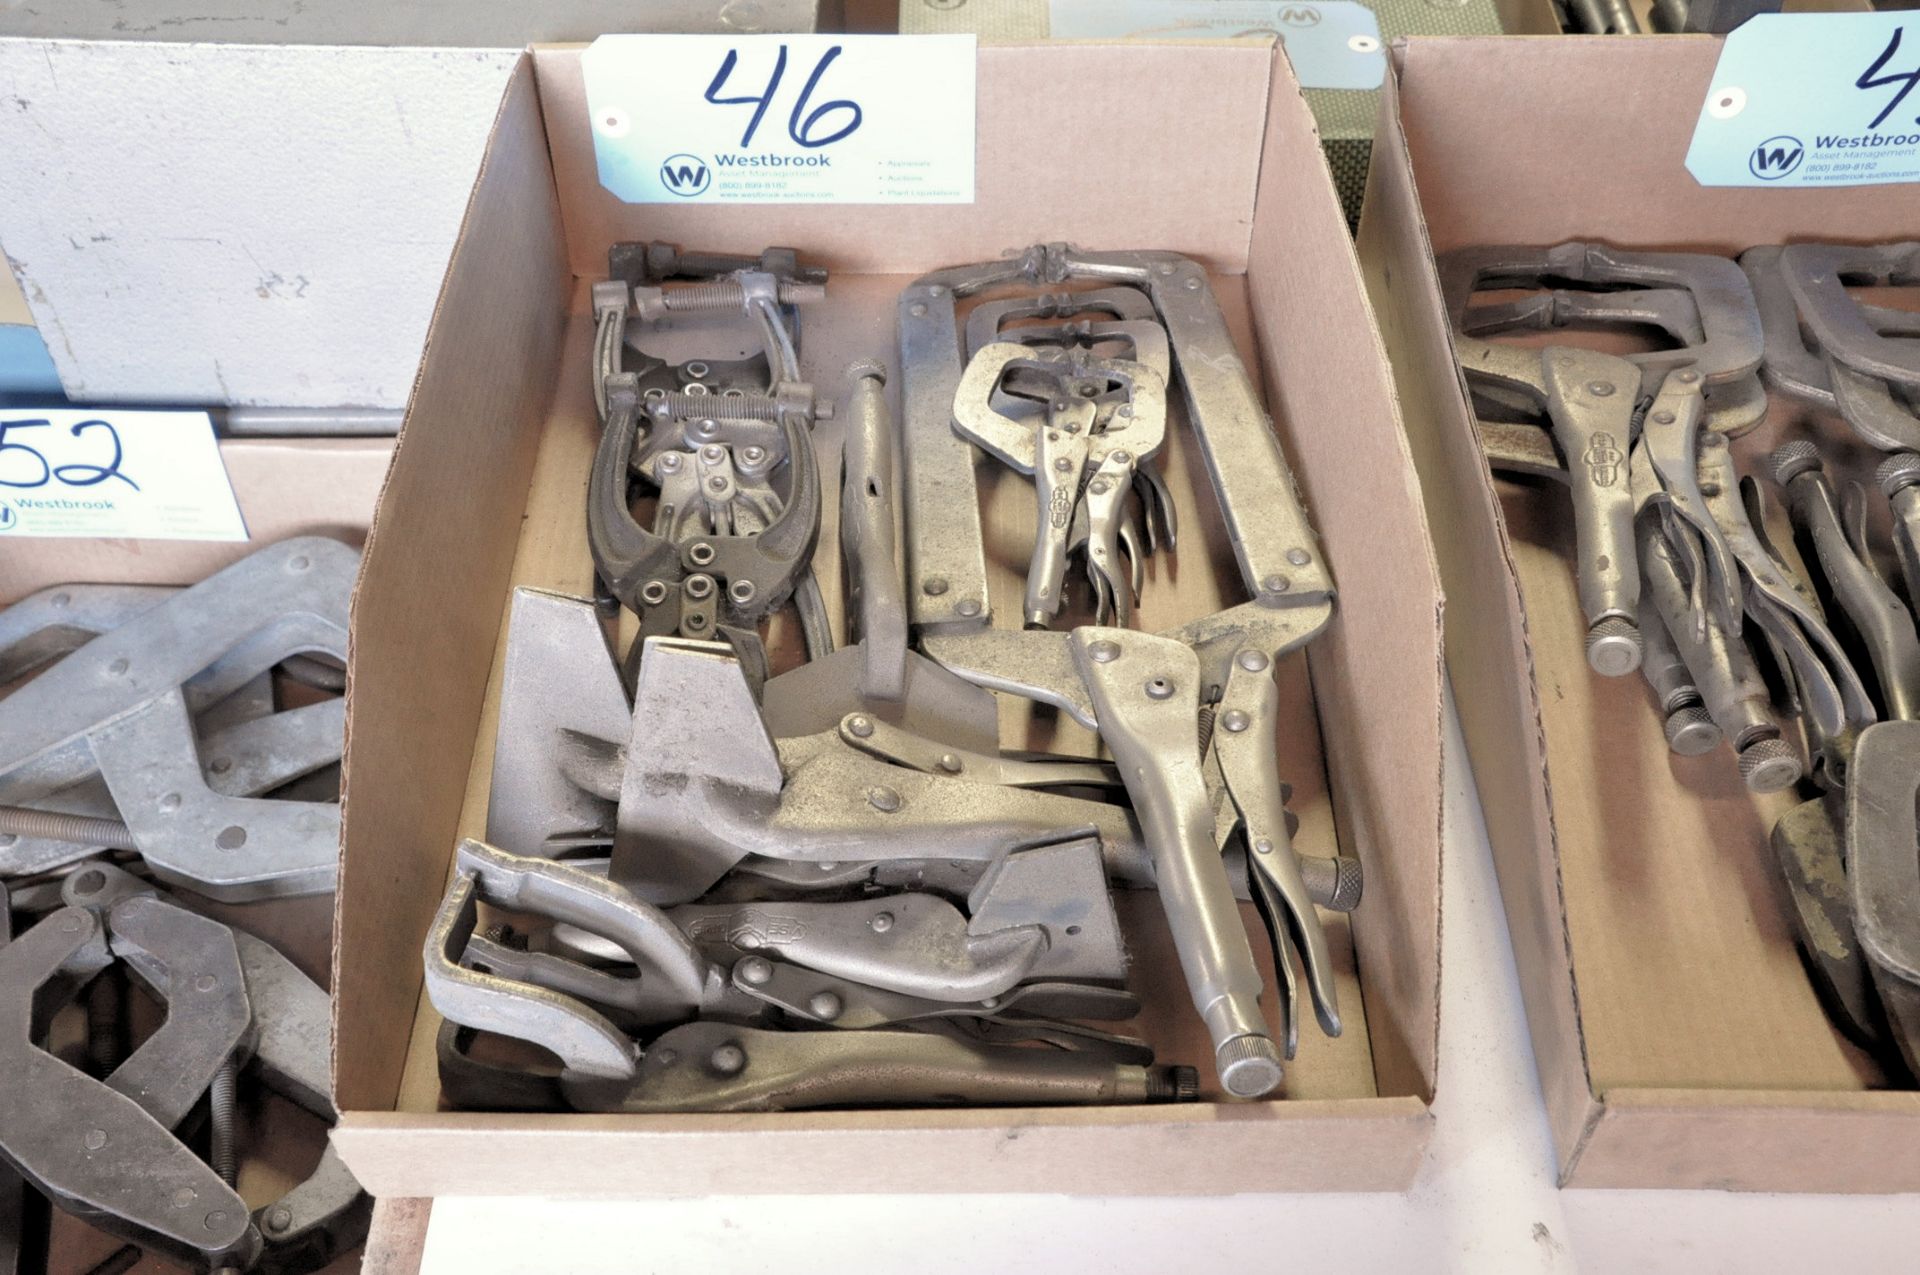 Lot-Various Vise Grip Clamps in (1) Box